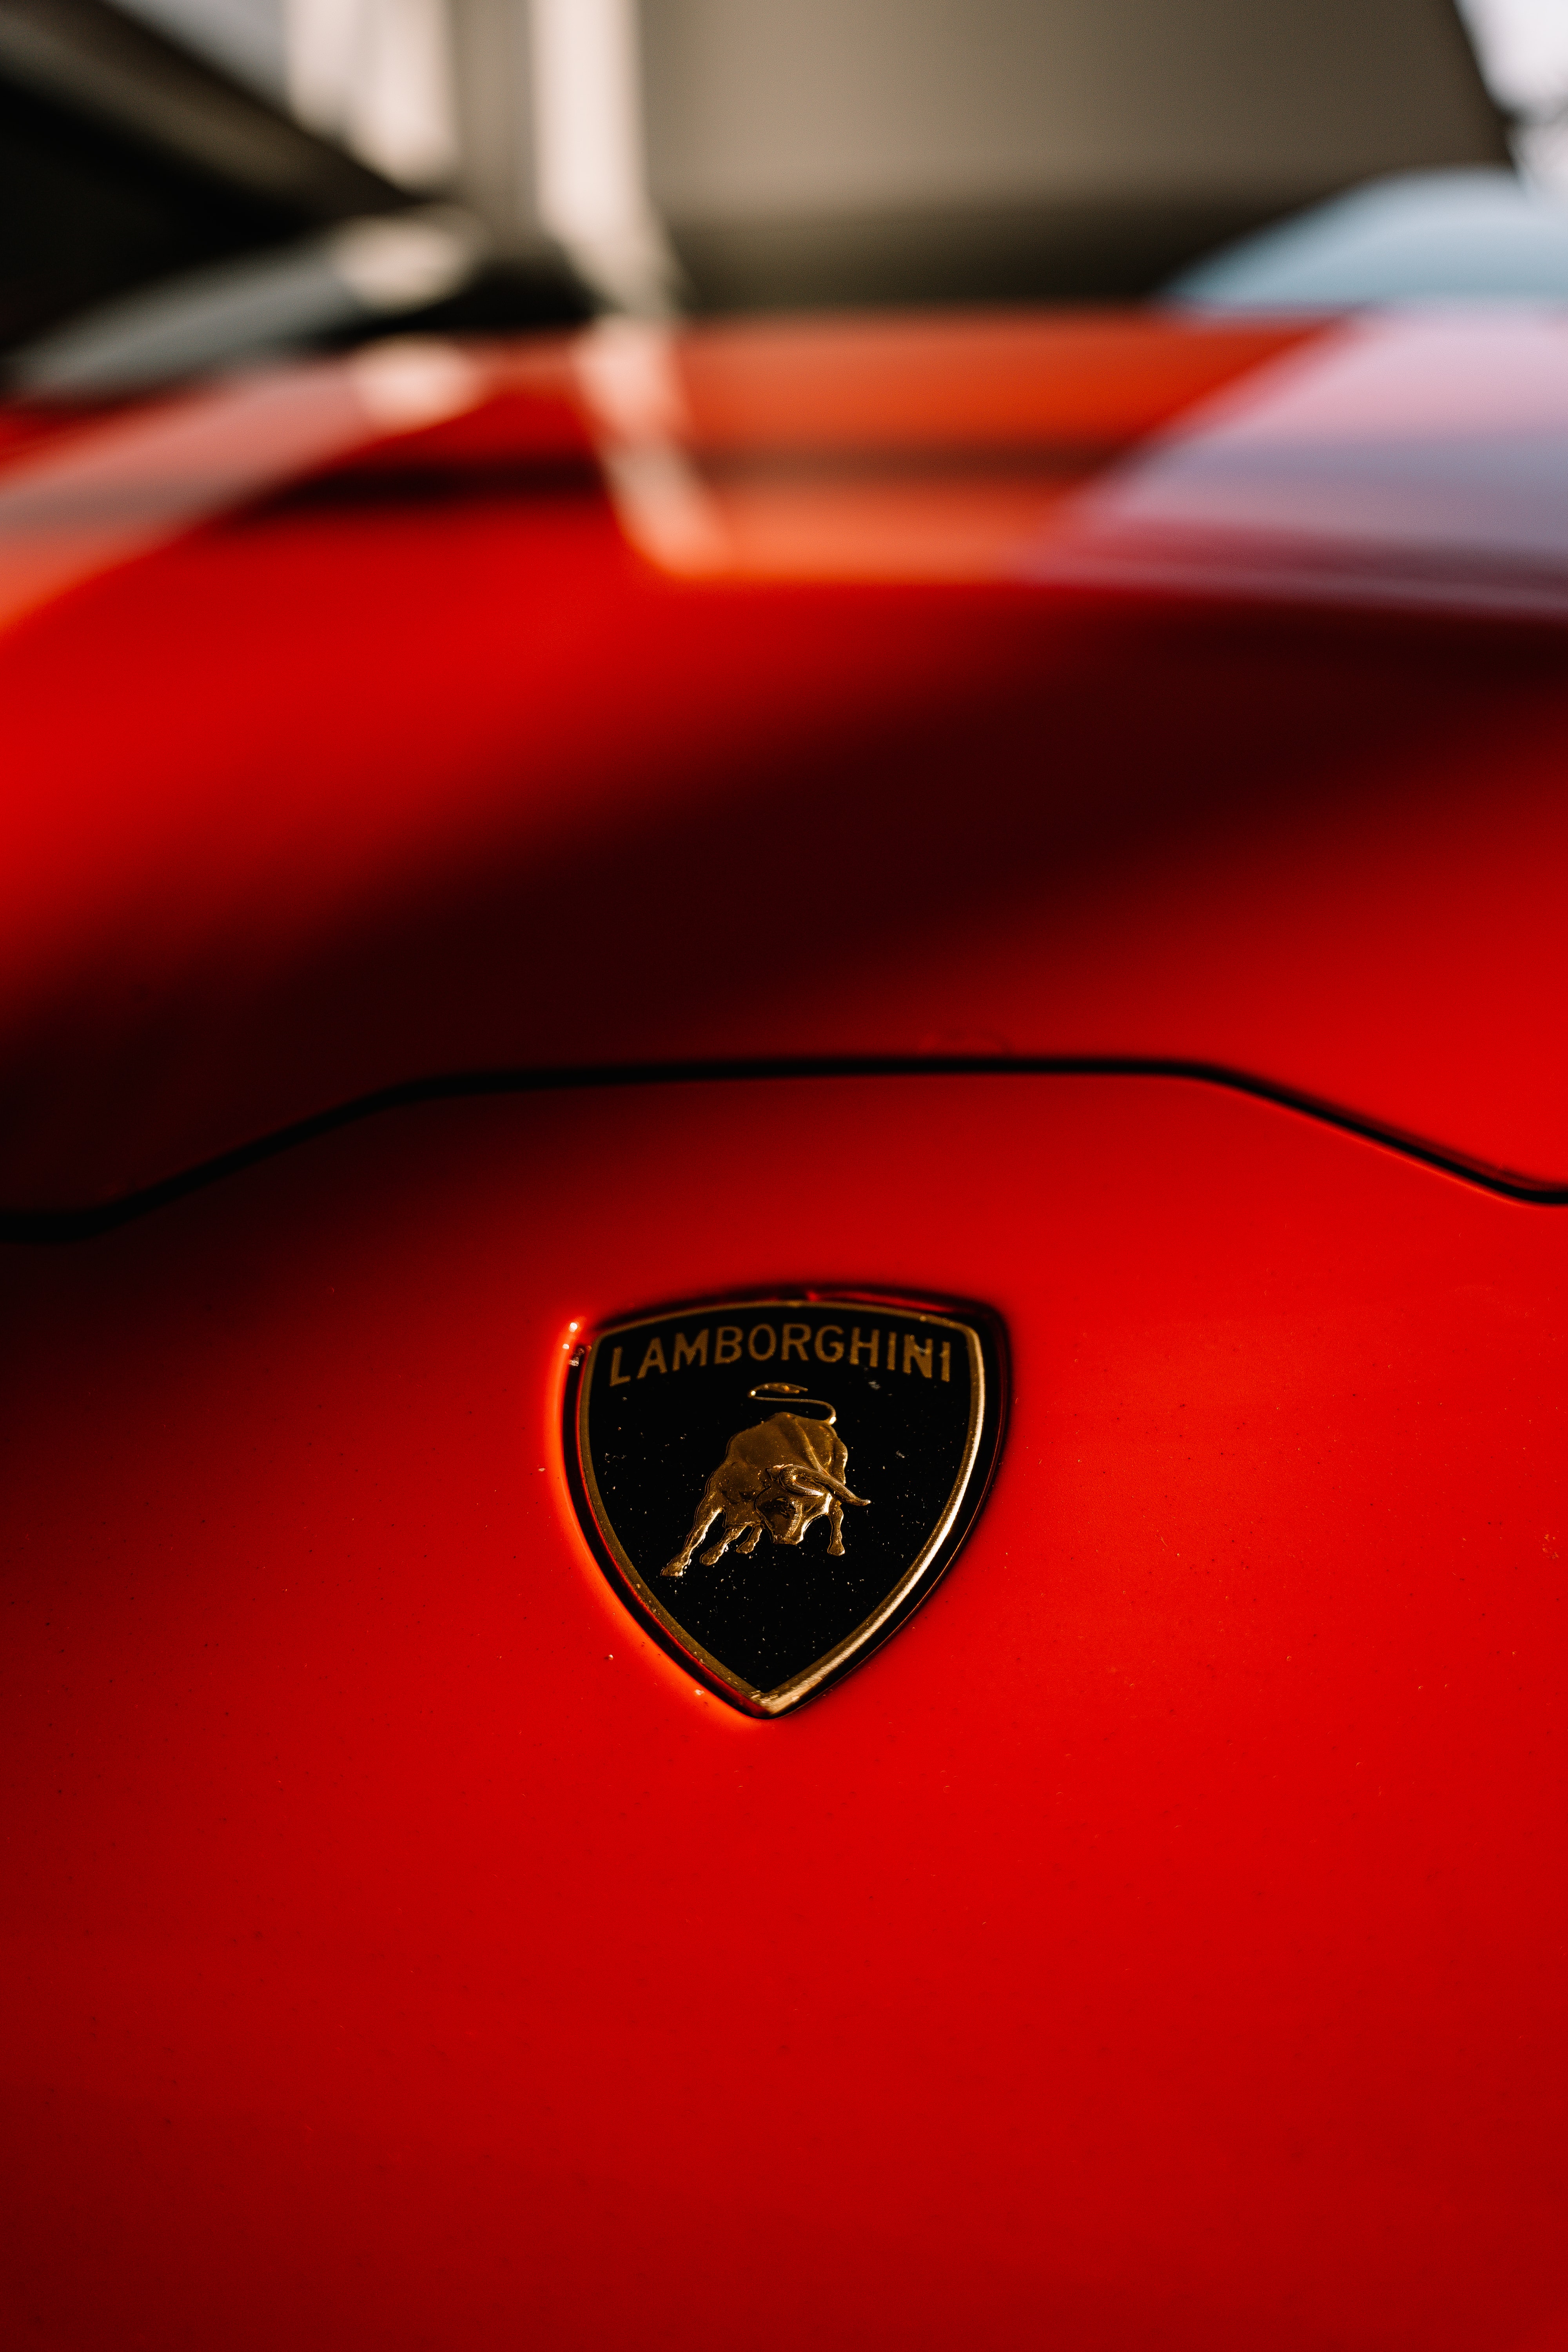 Phone Wallpaper (No watermarks) sports car, red, sports, cars